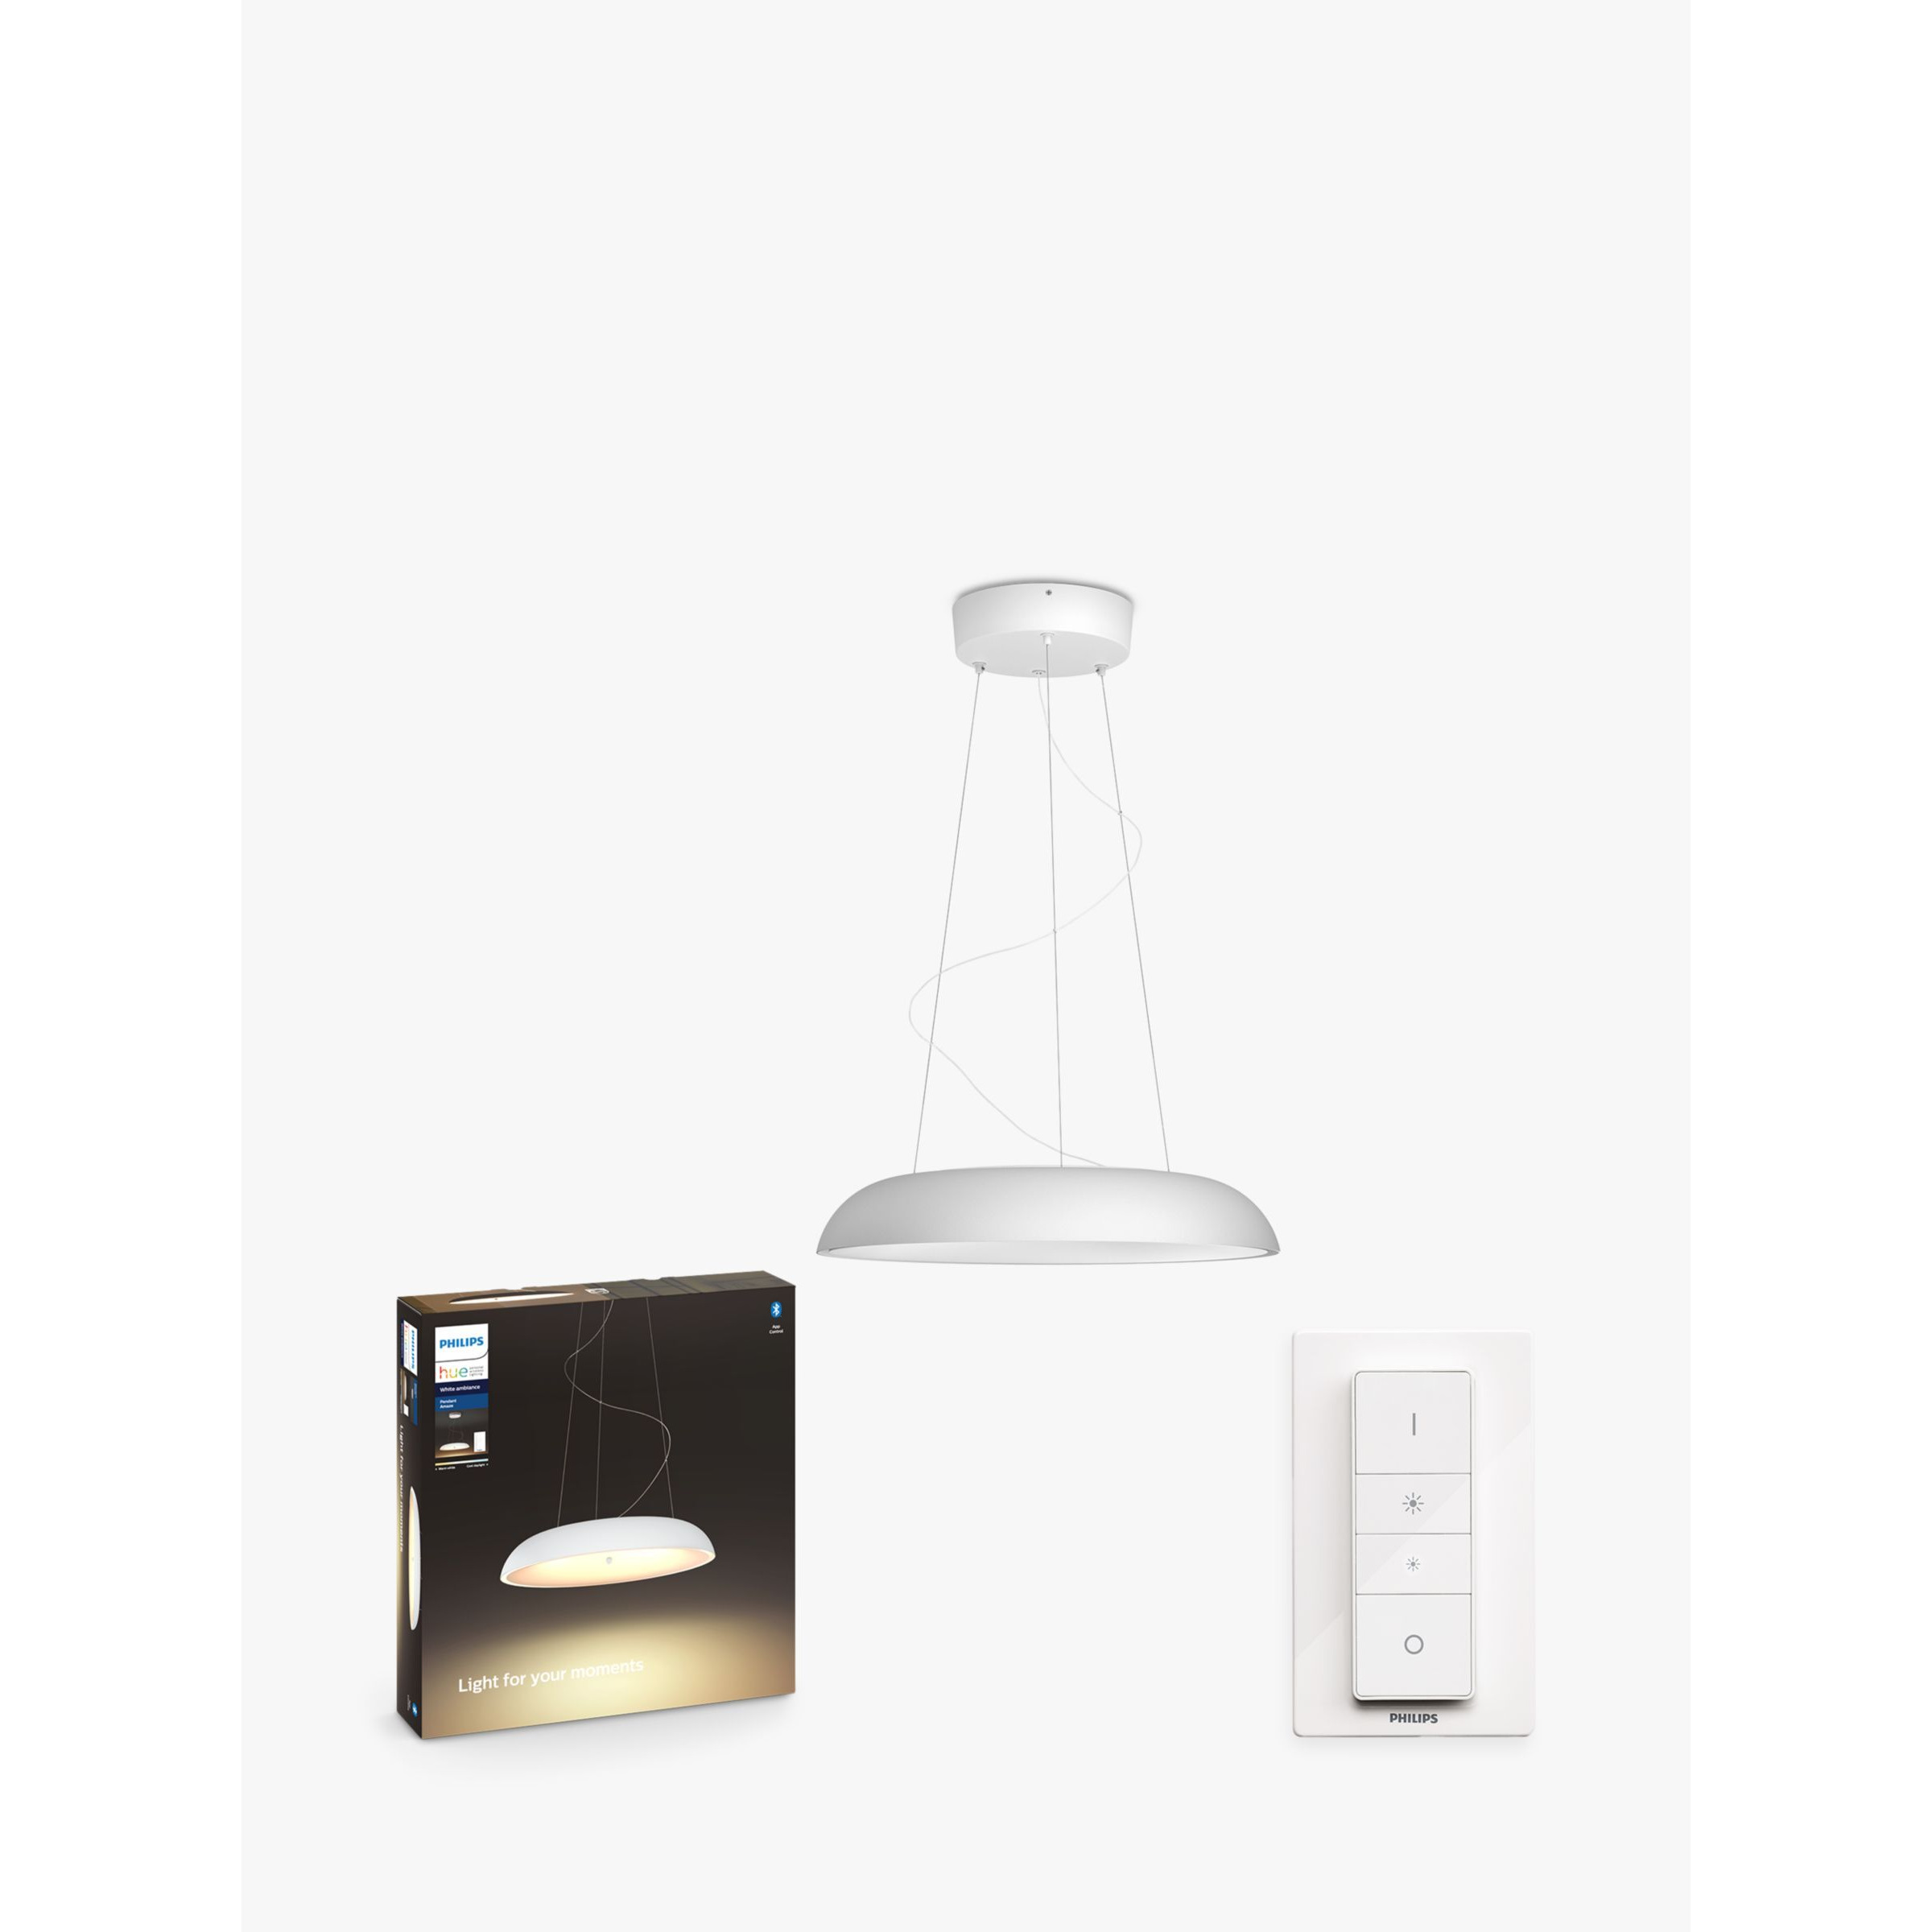 Philips Hue White Ambiance Amaze LED Smart Ceiling Light with Bluetooth and Dimmer Switch - image 1